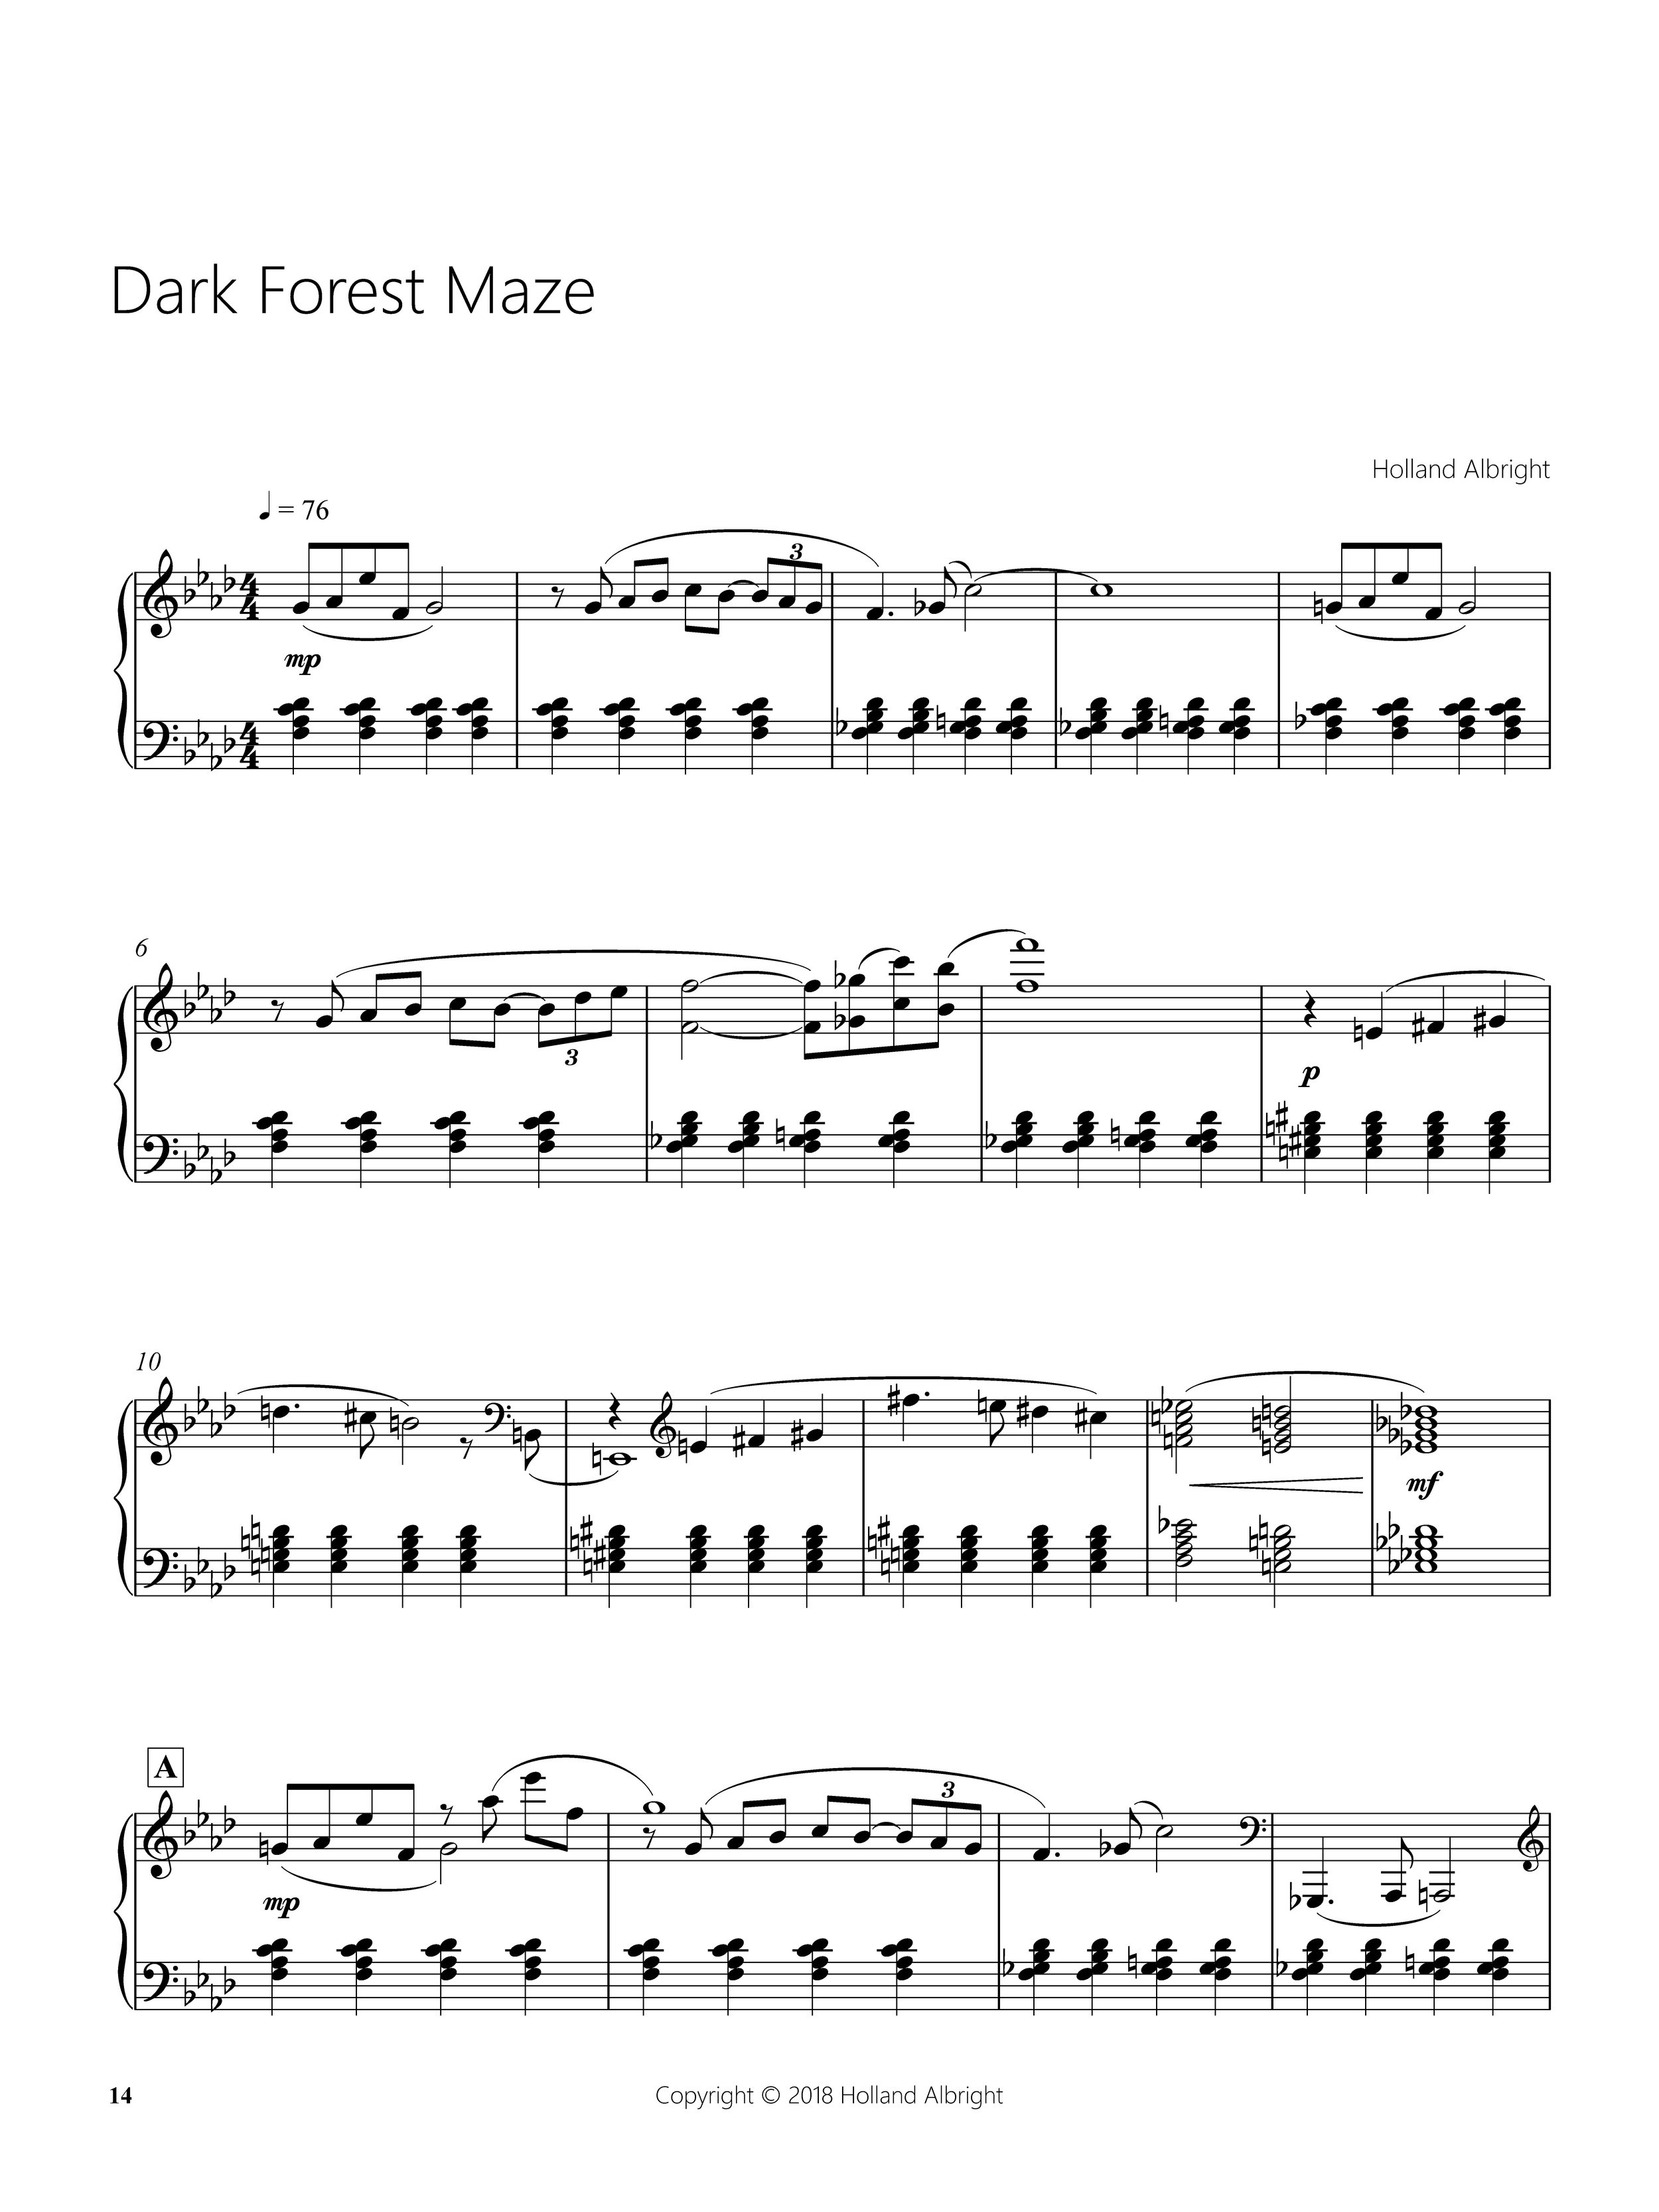 Dark Forest Maze - Piano_0014.png